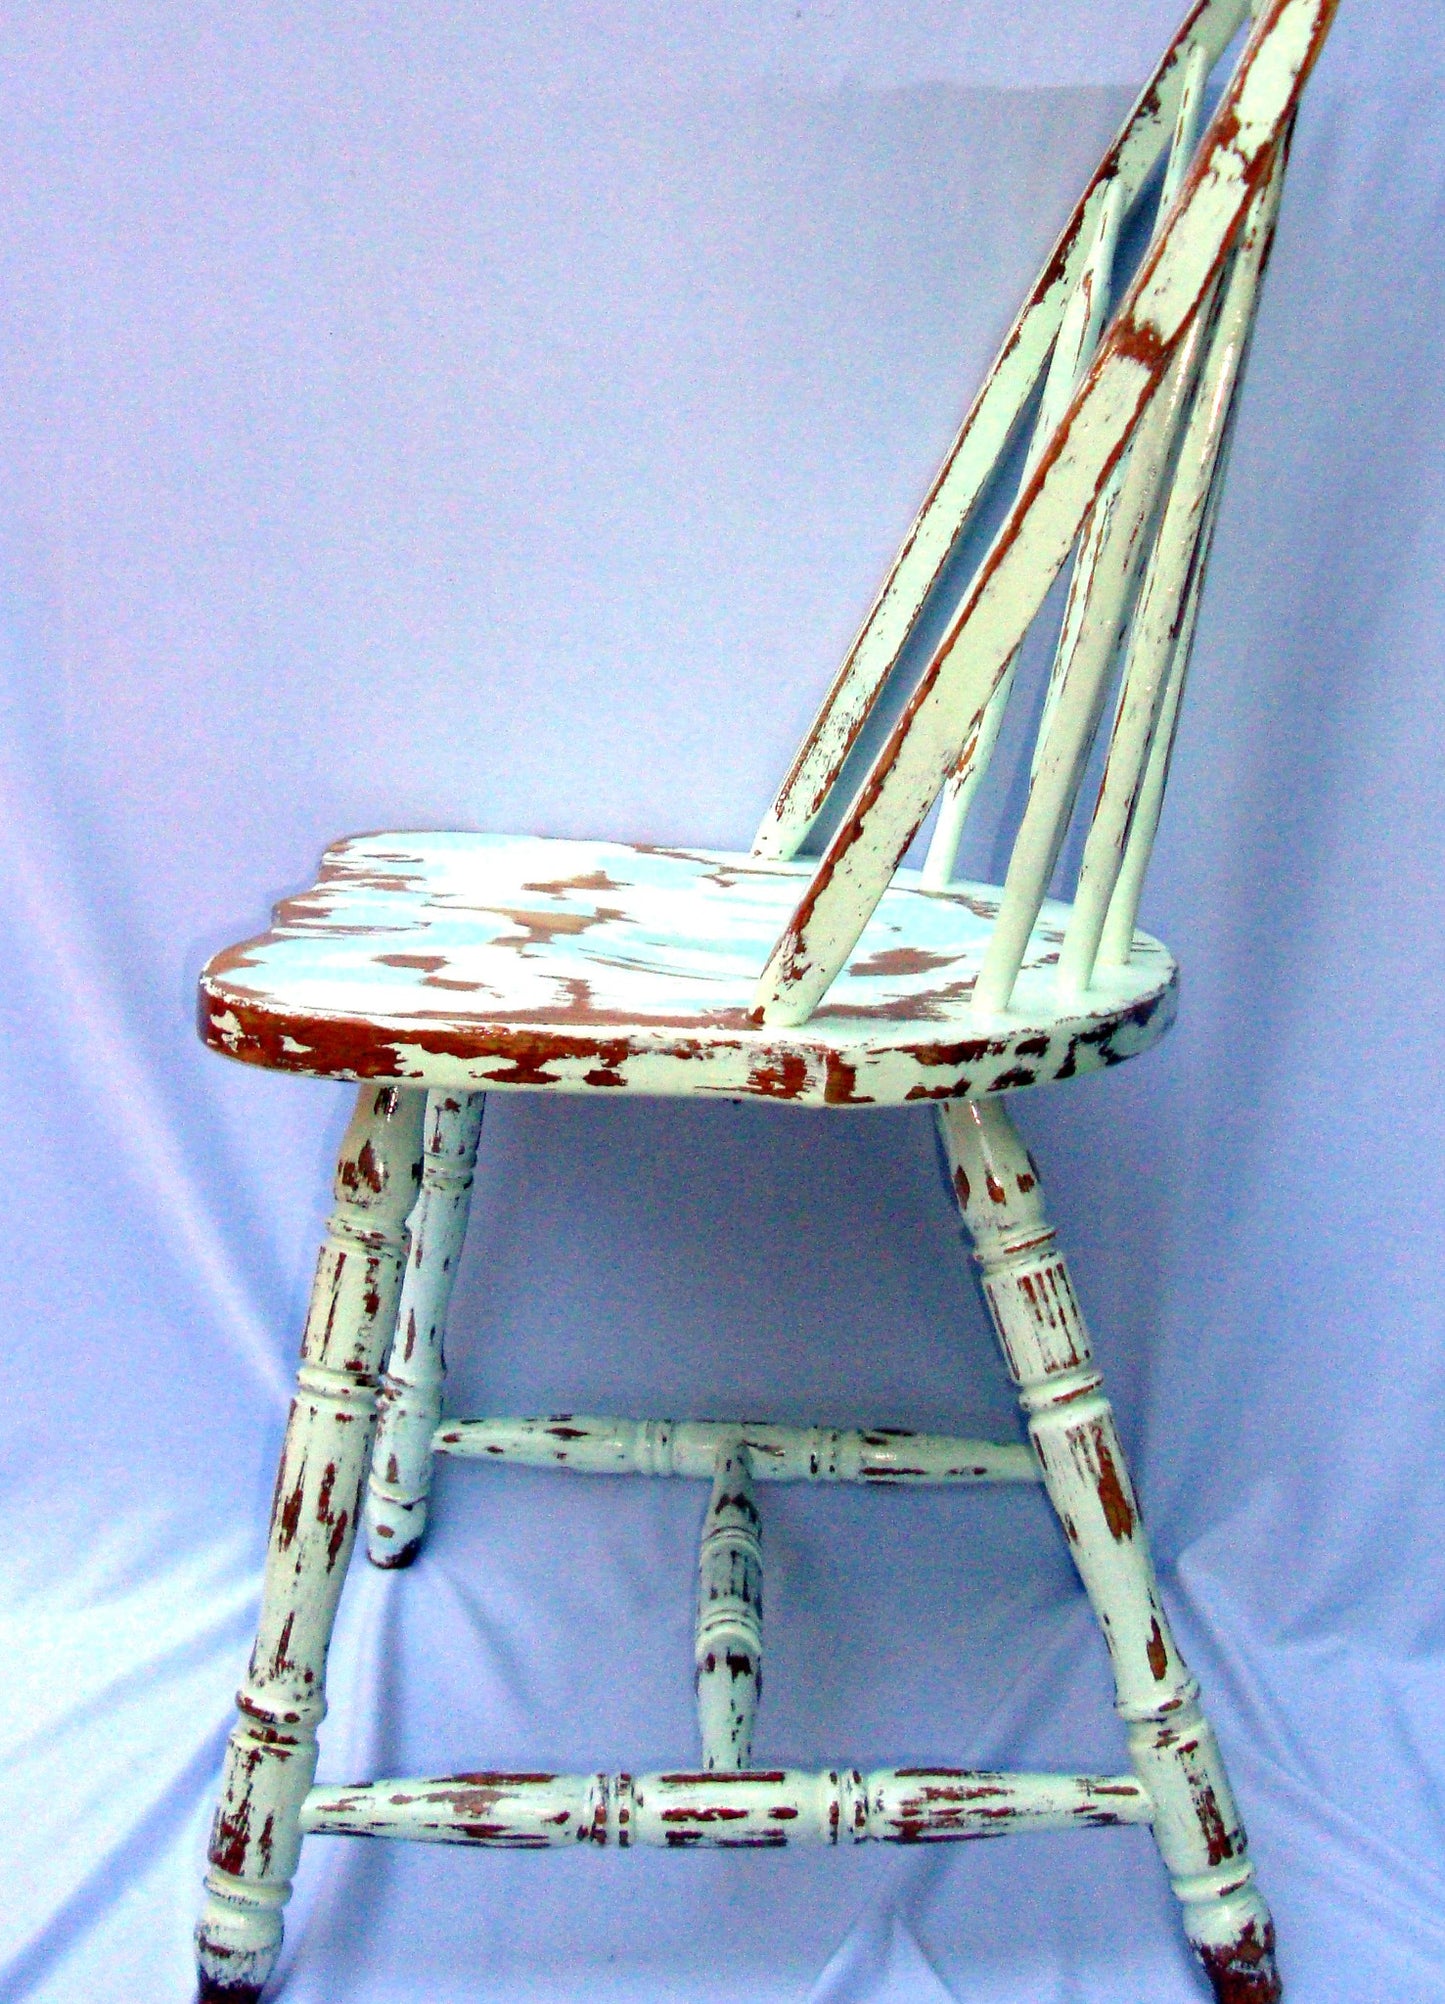 Vintage Cottage Distressed Farmhouse Windsor Chairs